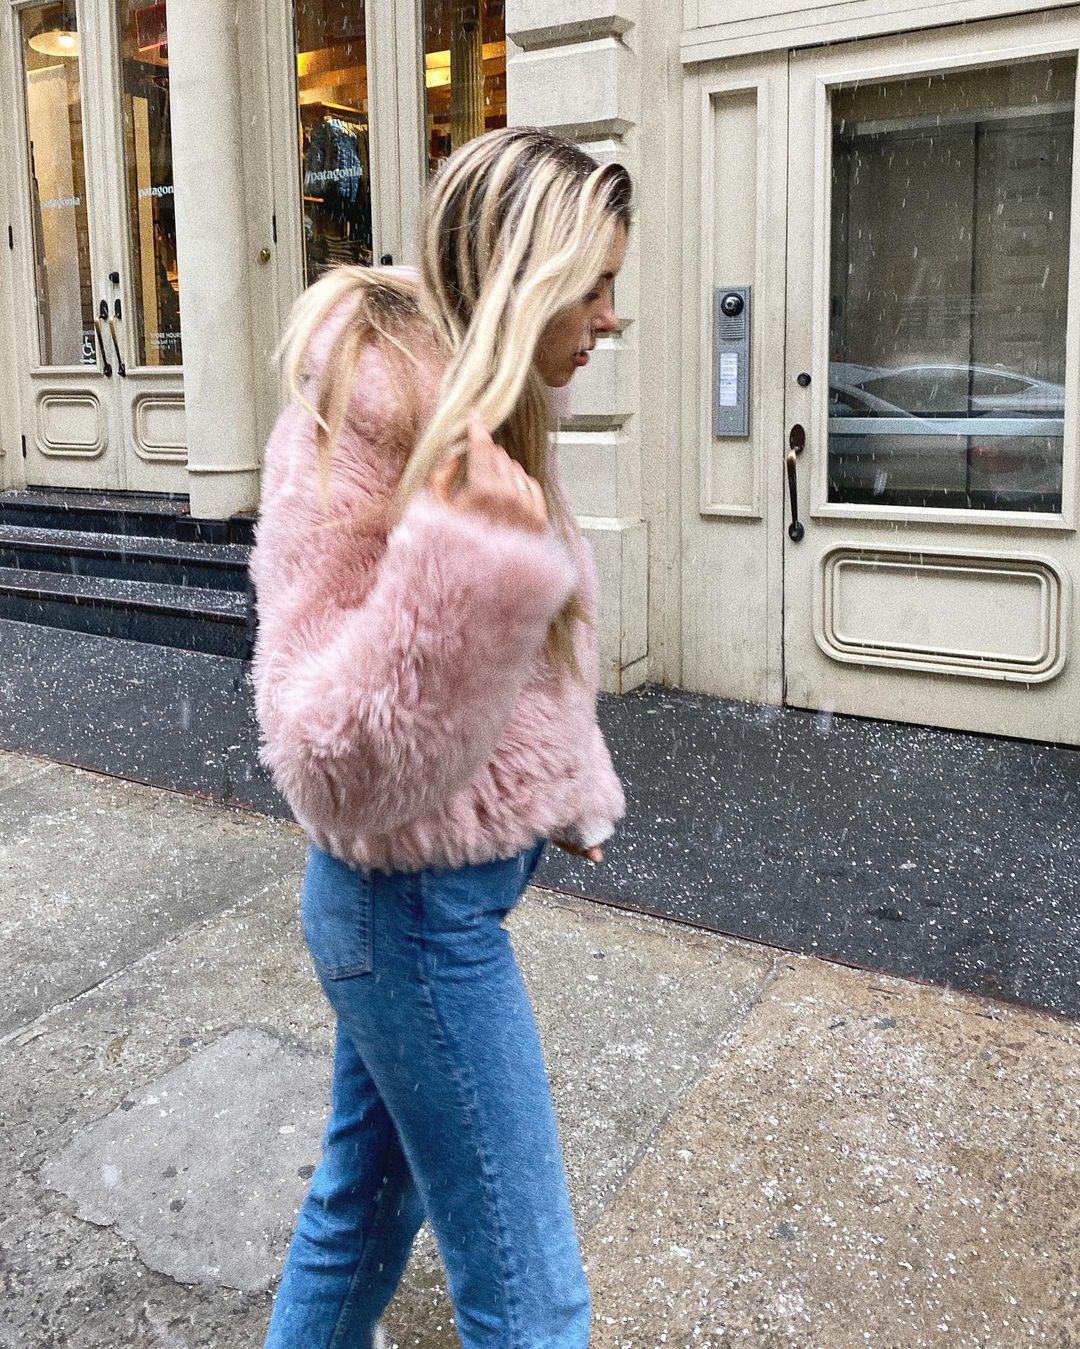 15 Faux Fur Jacket Outfits Will Never, How To Wear A Long Fur Coat With Jeans And Jacket